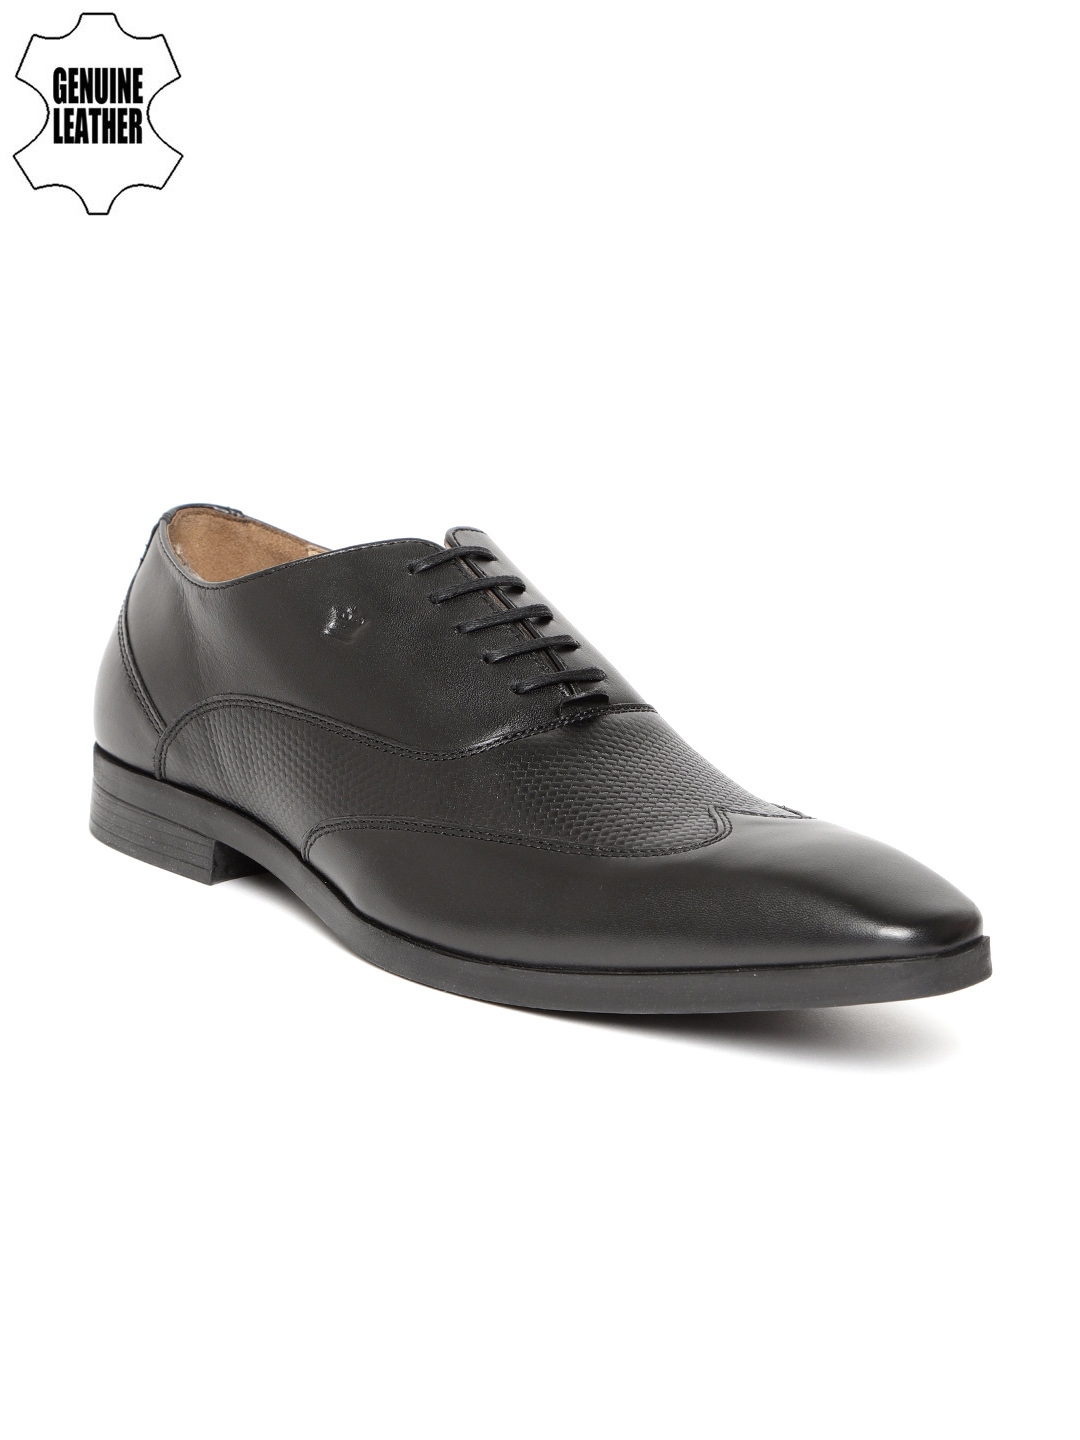 Buy Louis Philippe Men Black Genuine Leather Textured Formal Oxfords ...